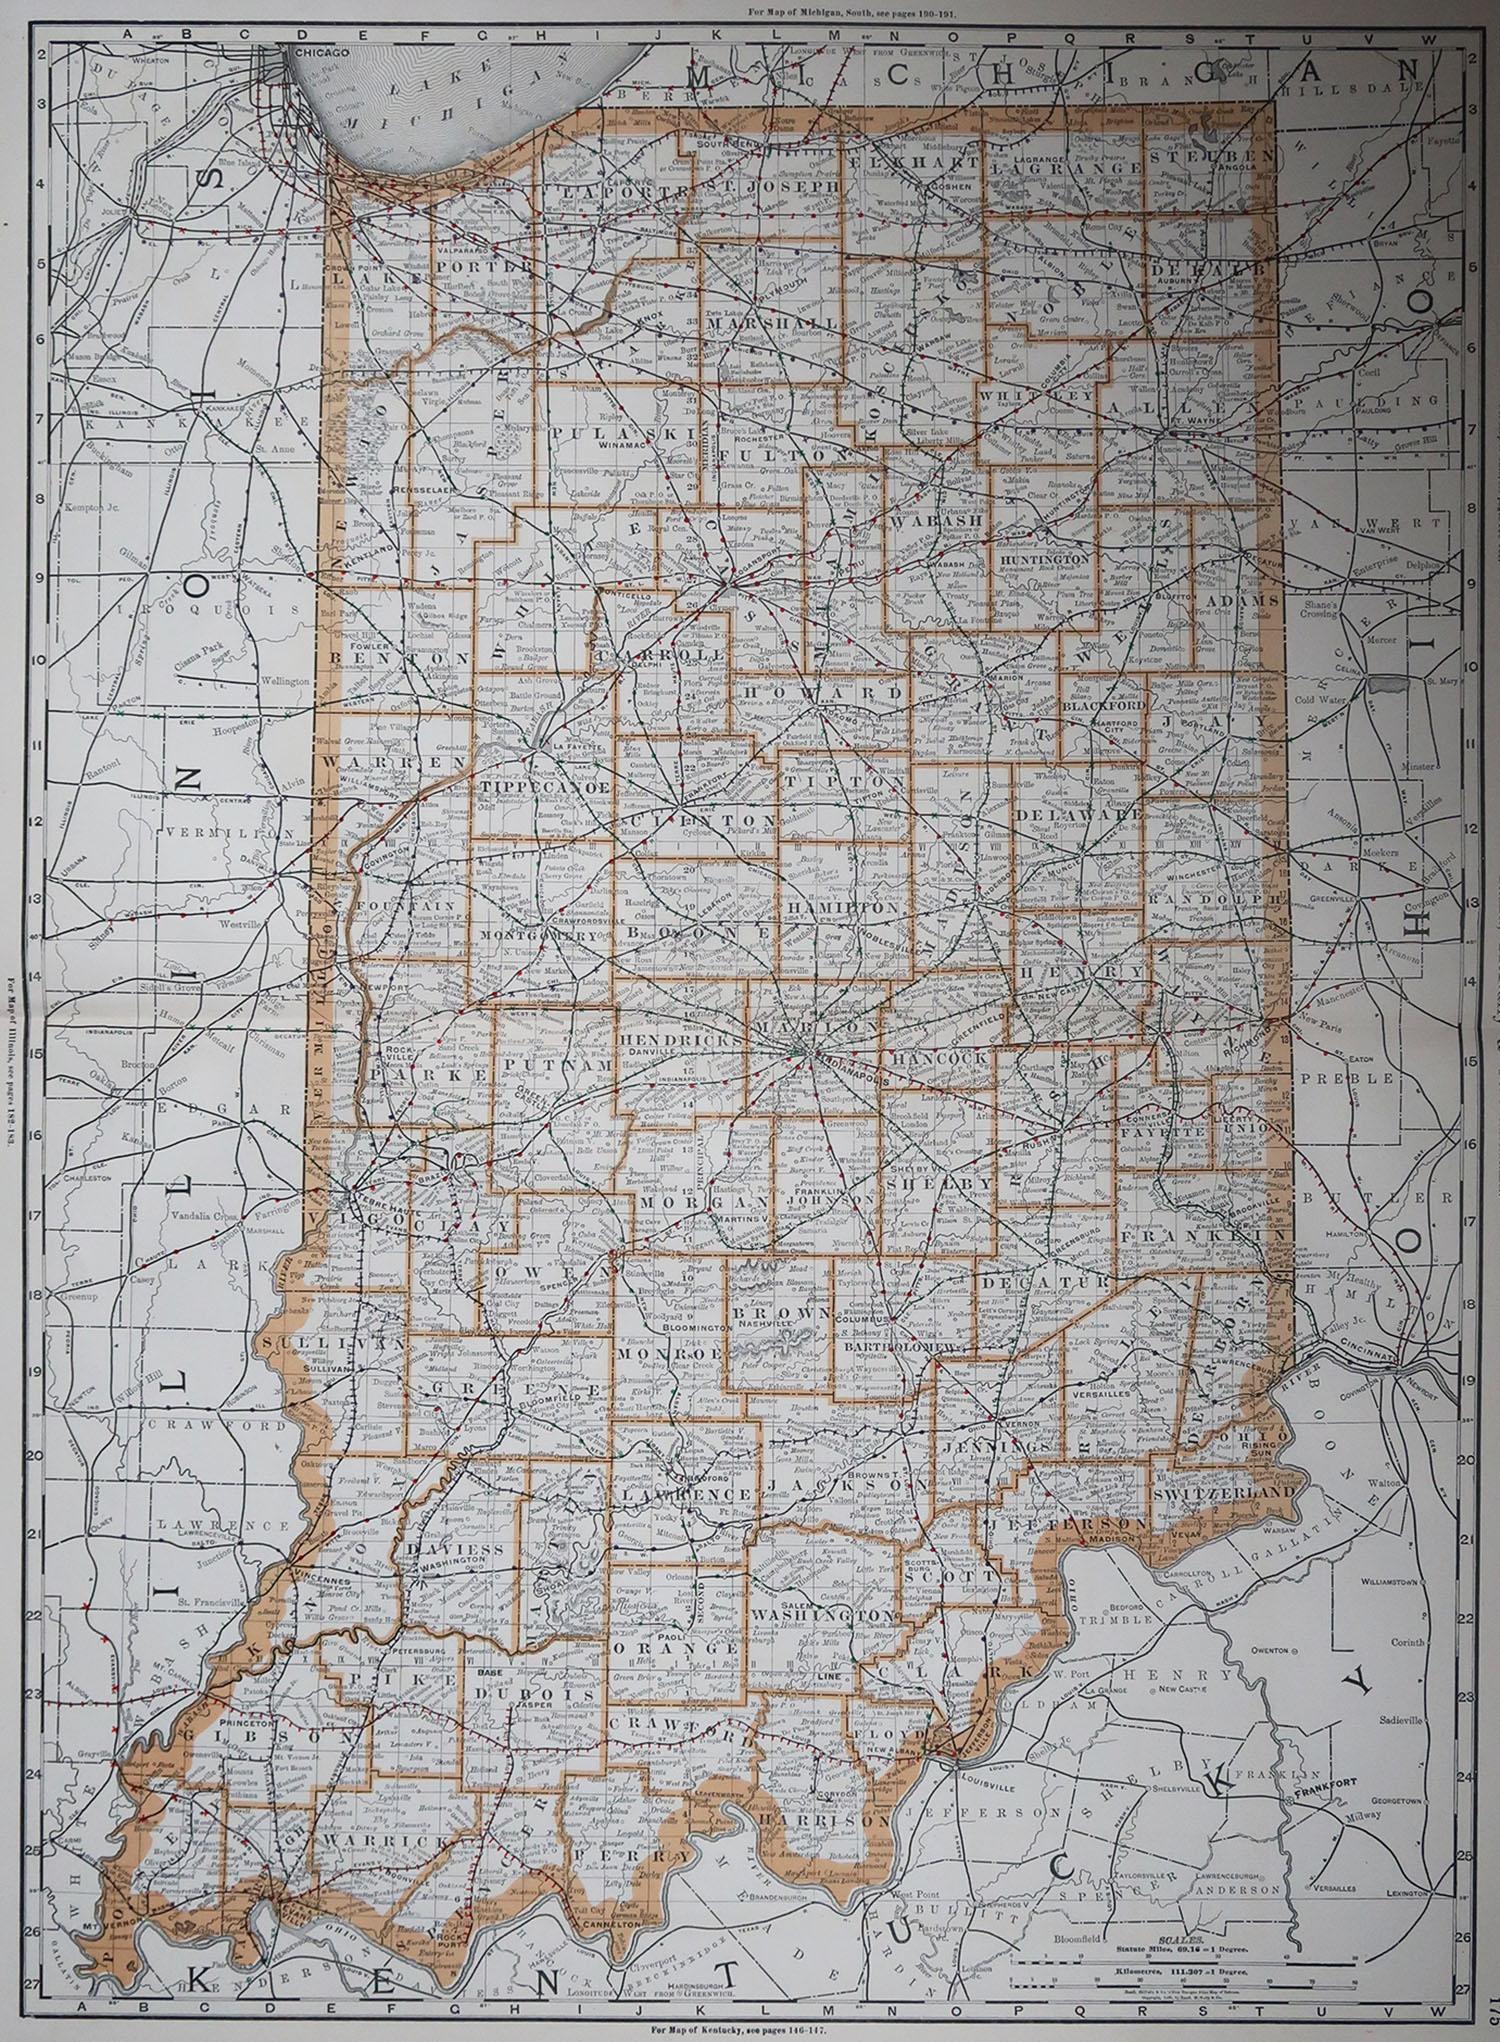 Fabulous map of Indiana.

Original color.

By Rand, McNally & Co.

Published, 1894.

Unframed.

Free shipping.